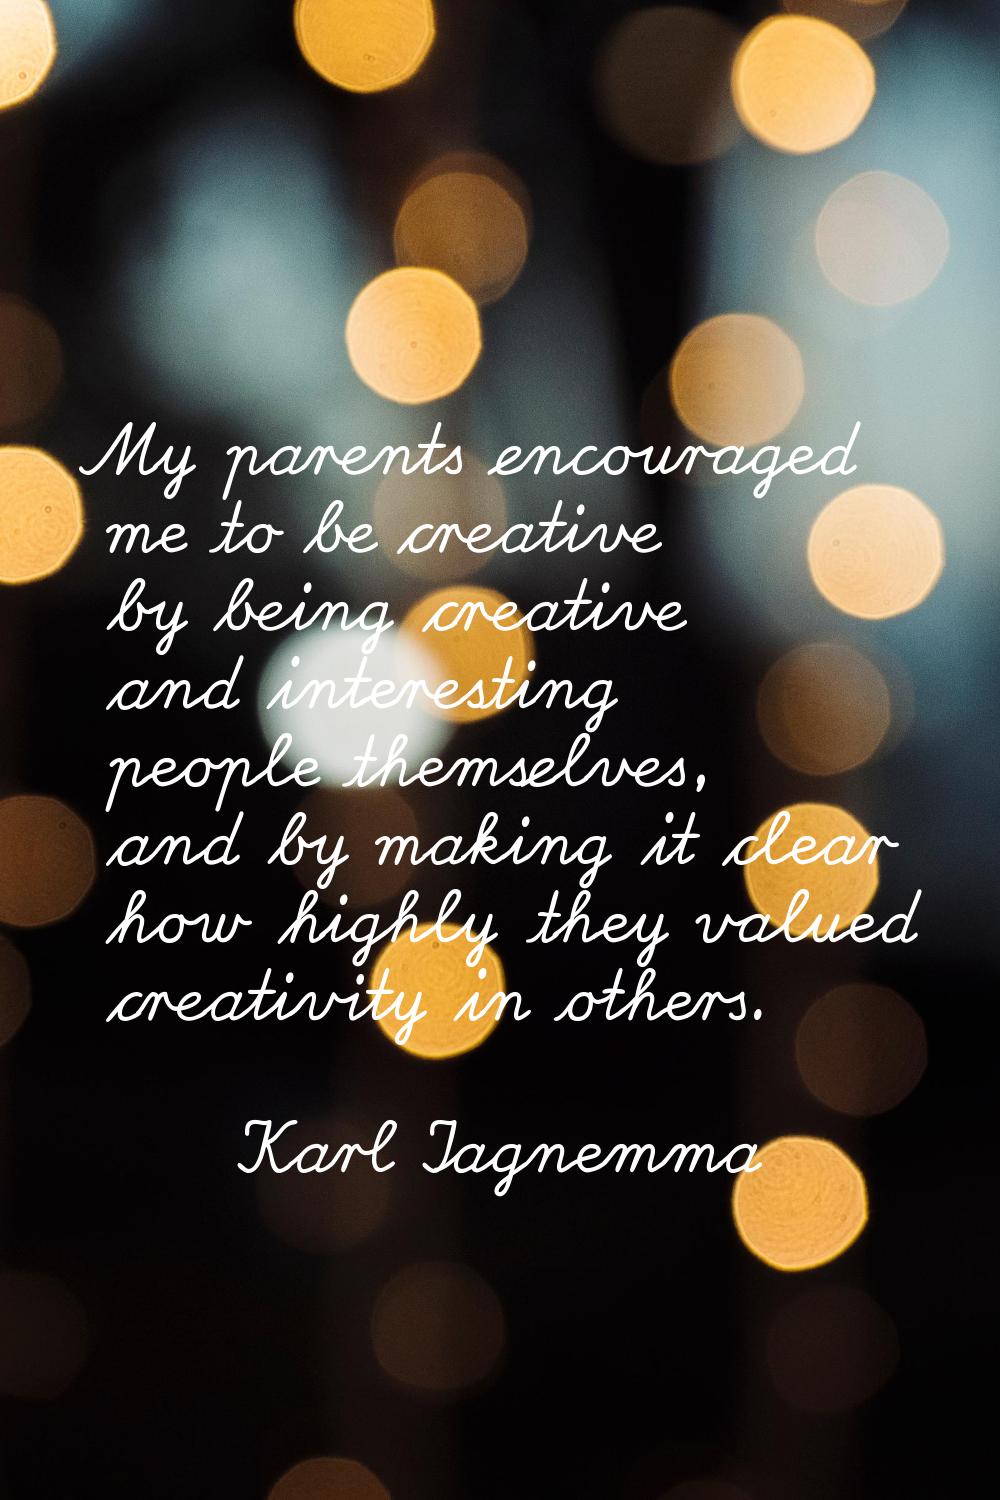 My parents encouraged me to be creative by being creative and interesting people themselves, and by